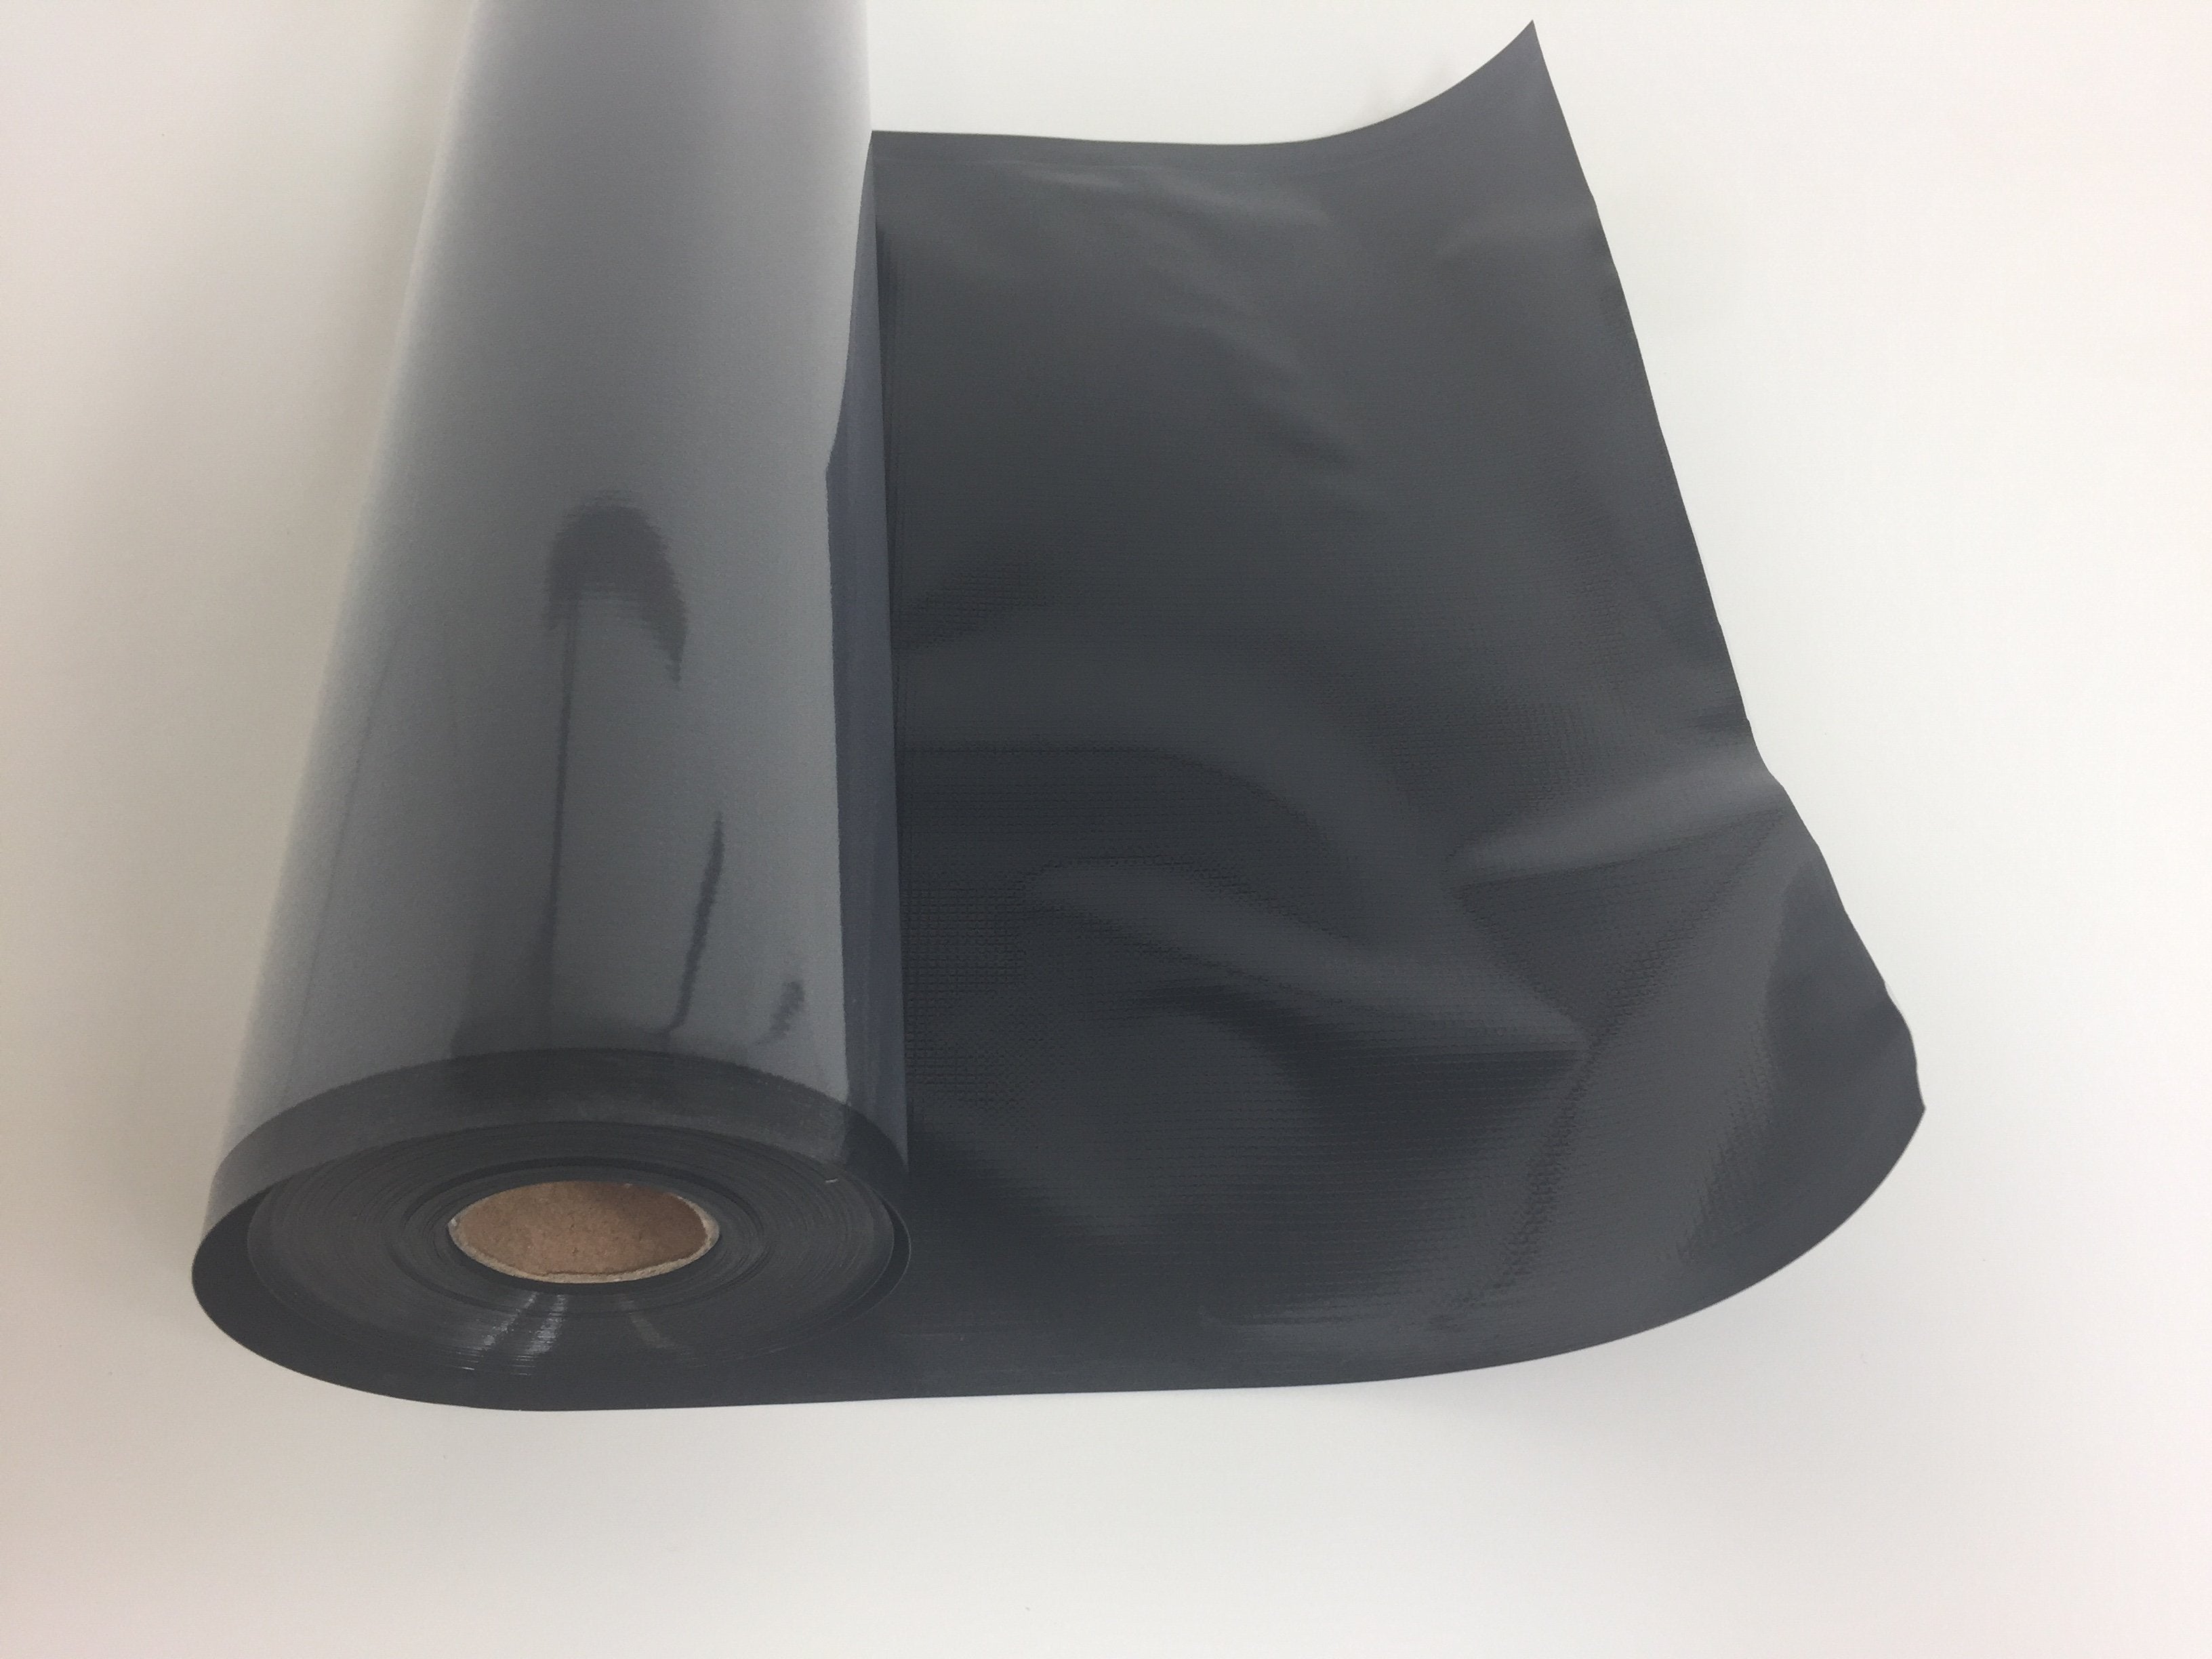 StashBags 15in x 50ft Vacuum Seal Roll Black & Clear